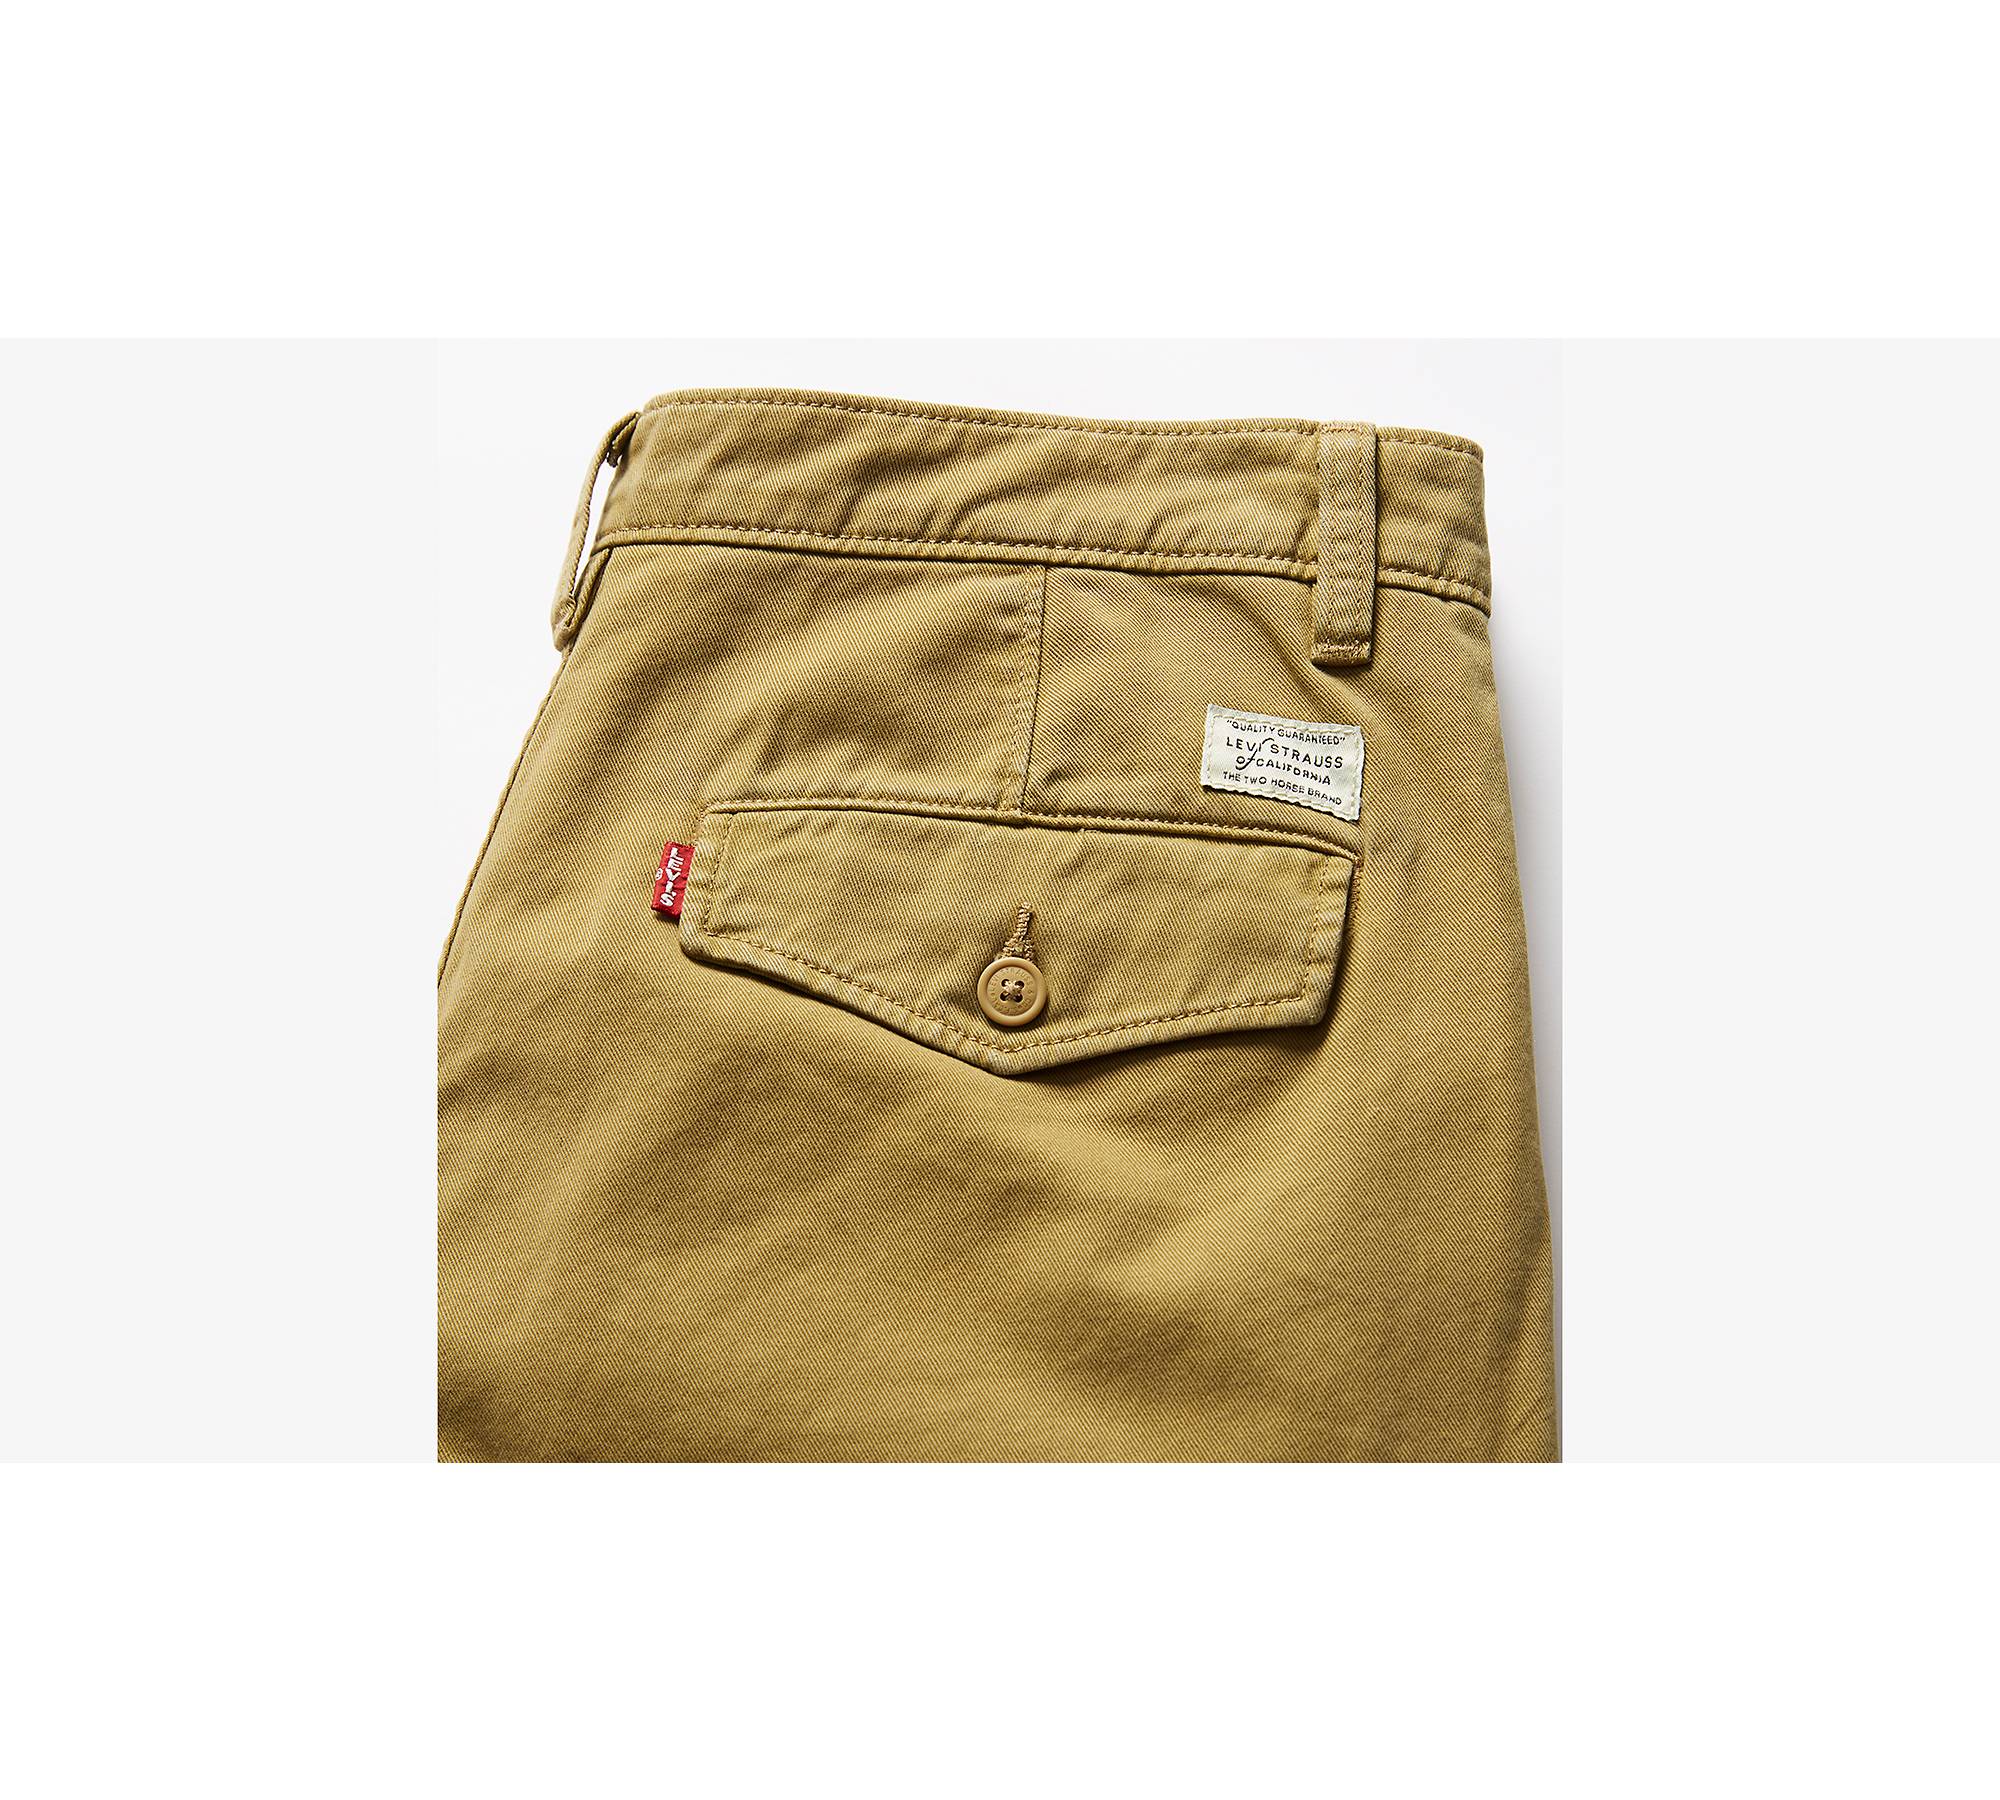 Levi's® Xx Chino Authentic Straight Fit Men's Pants - Brown 